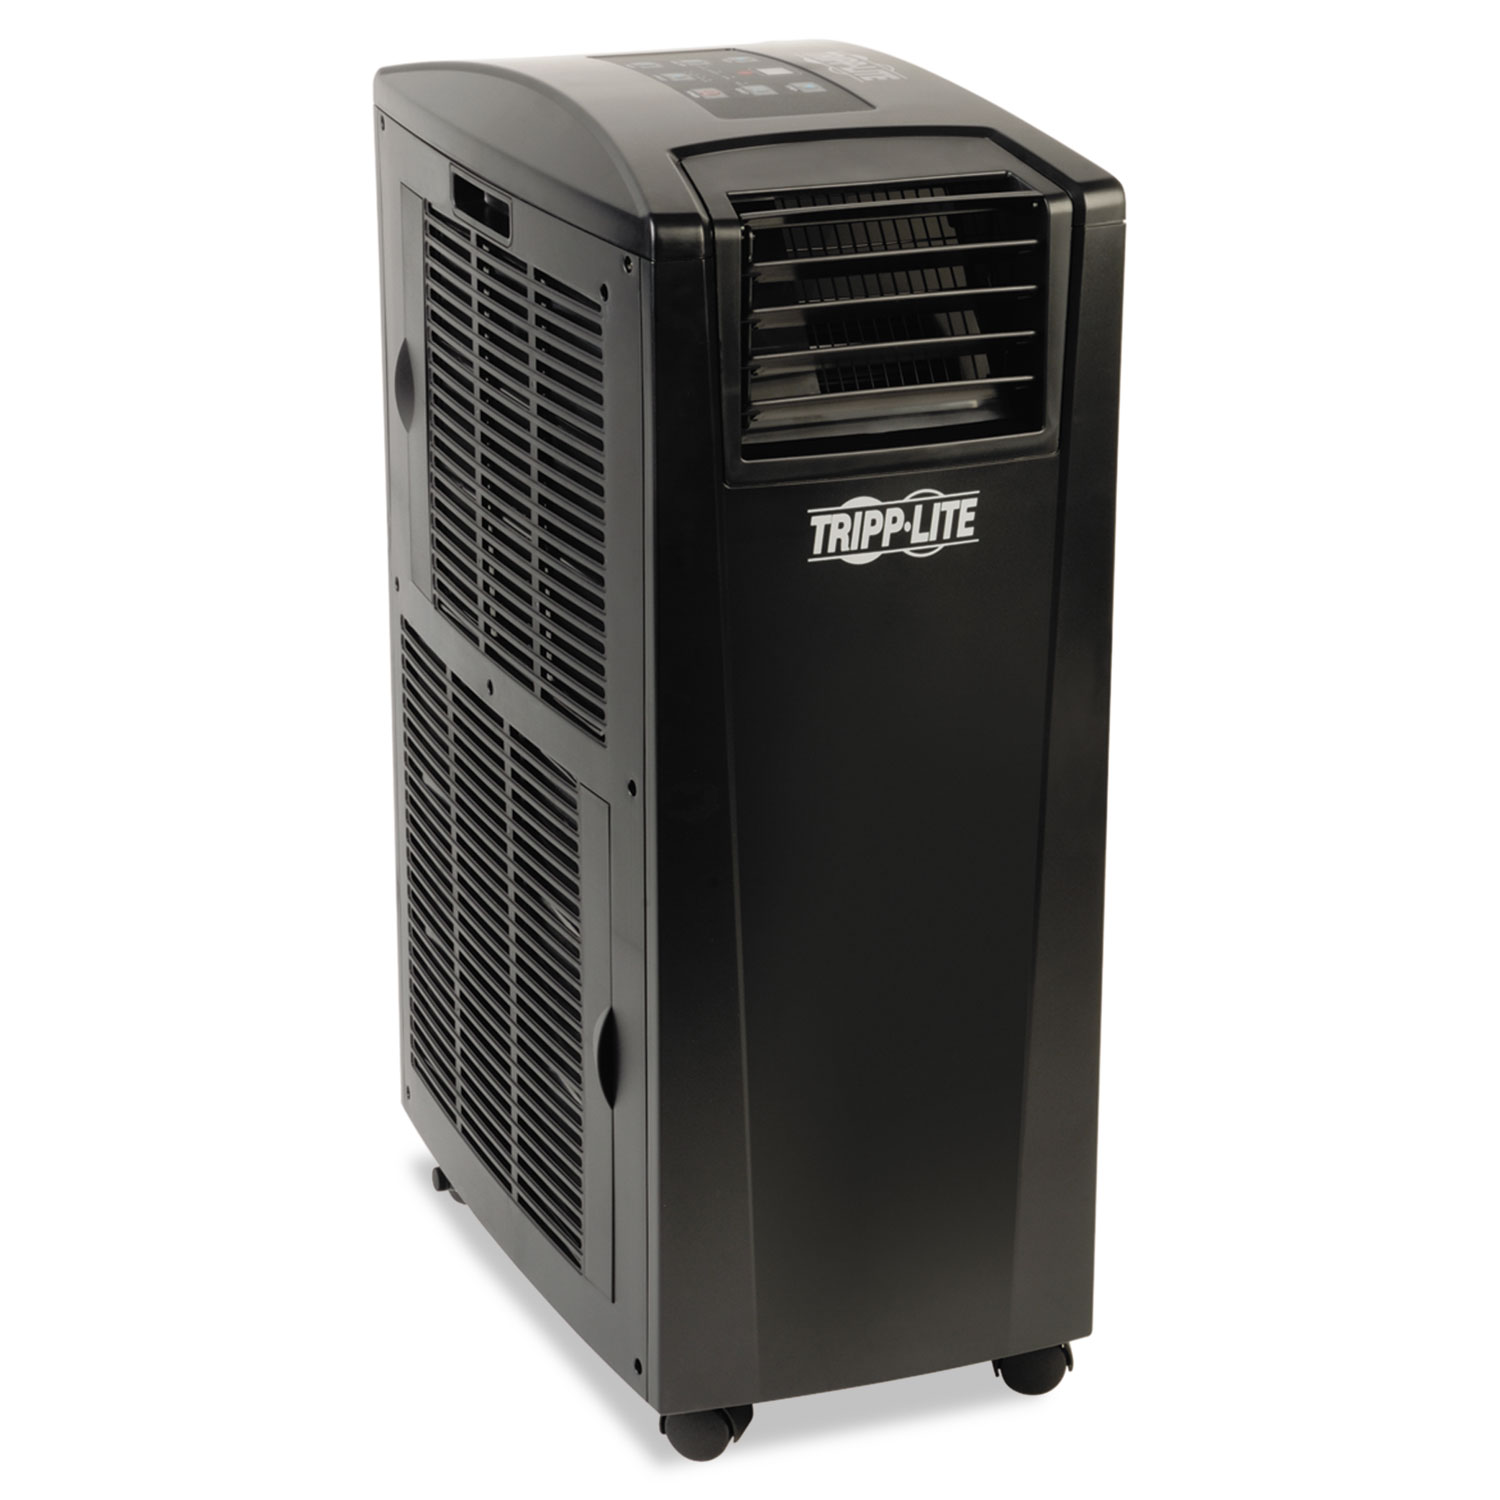 Self-Contained Portable Air Conditioning Unit for Servers, 120V